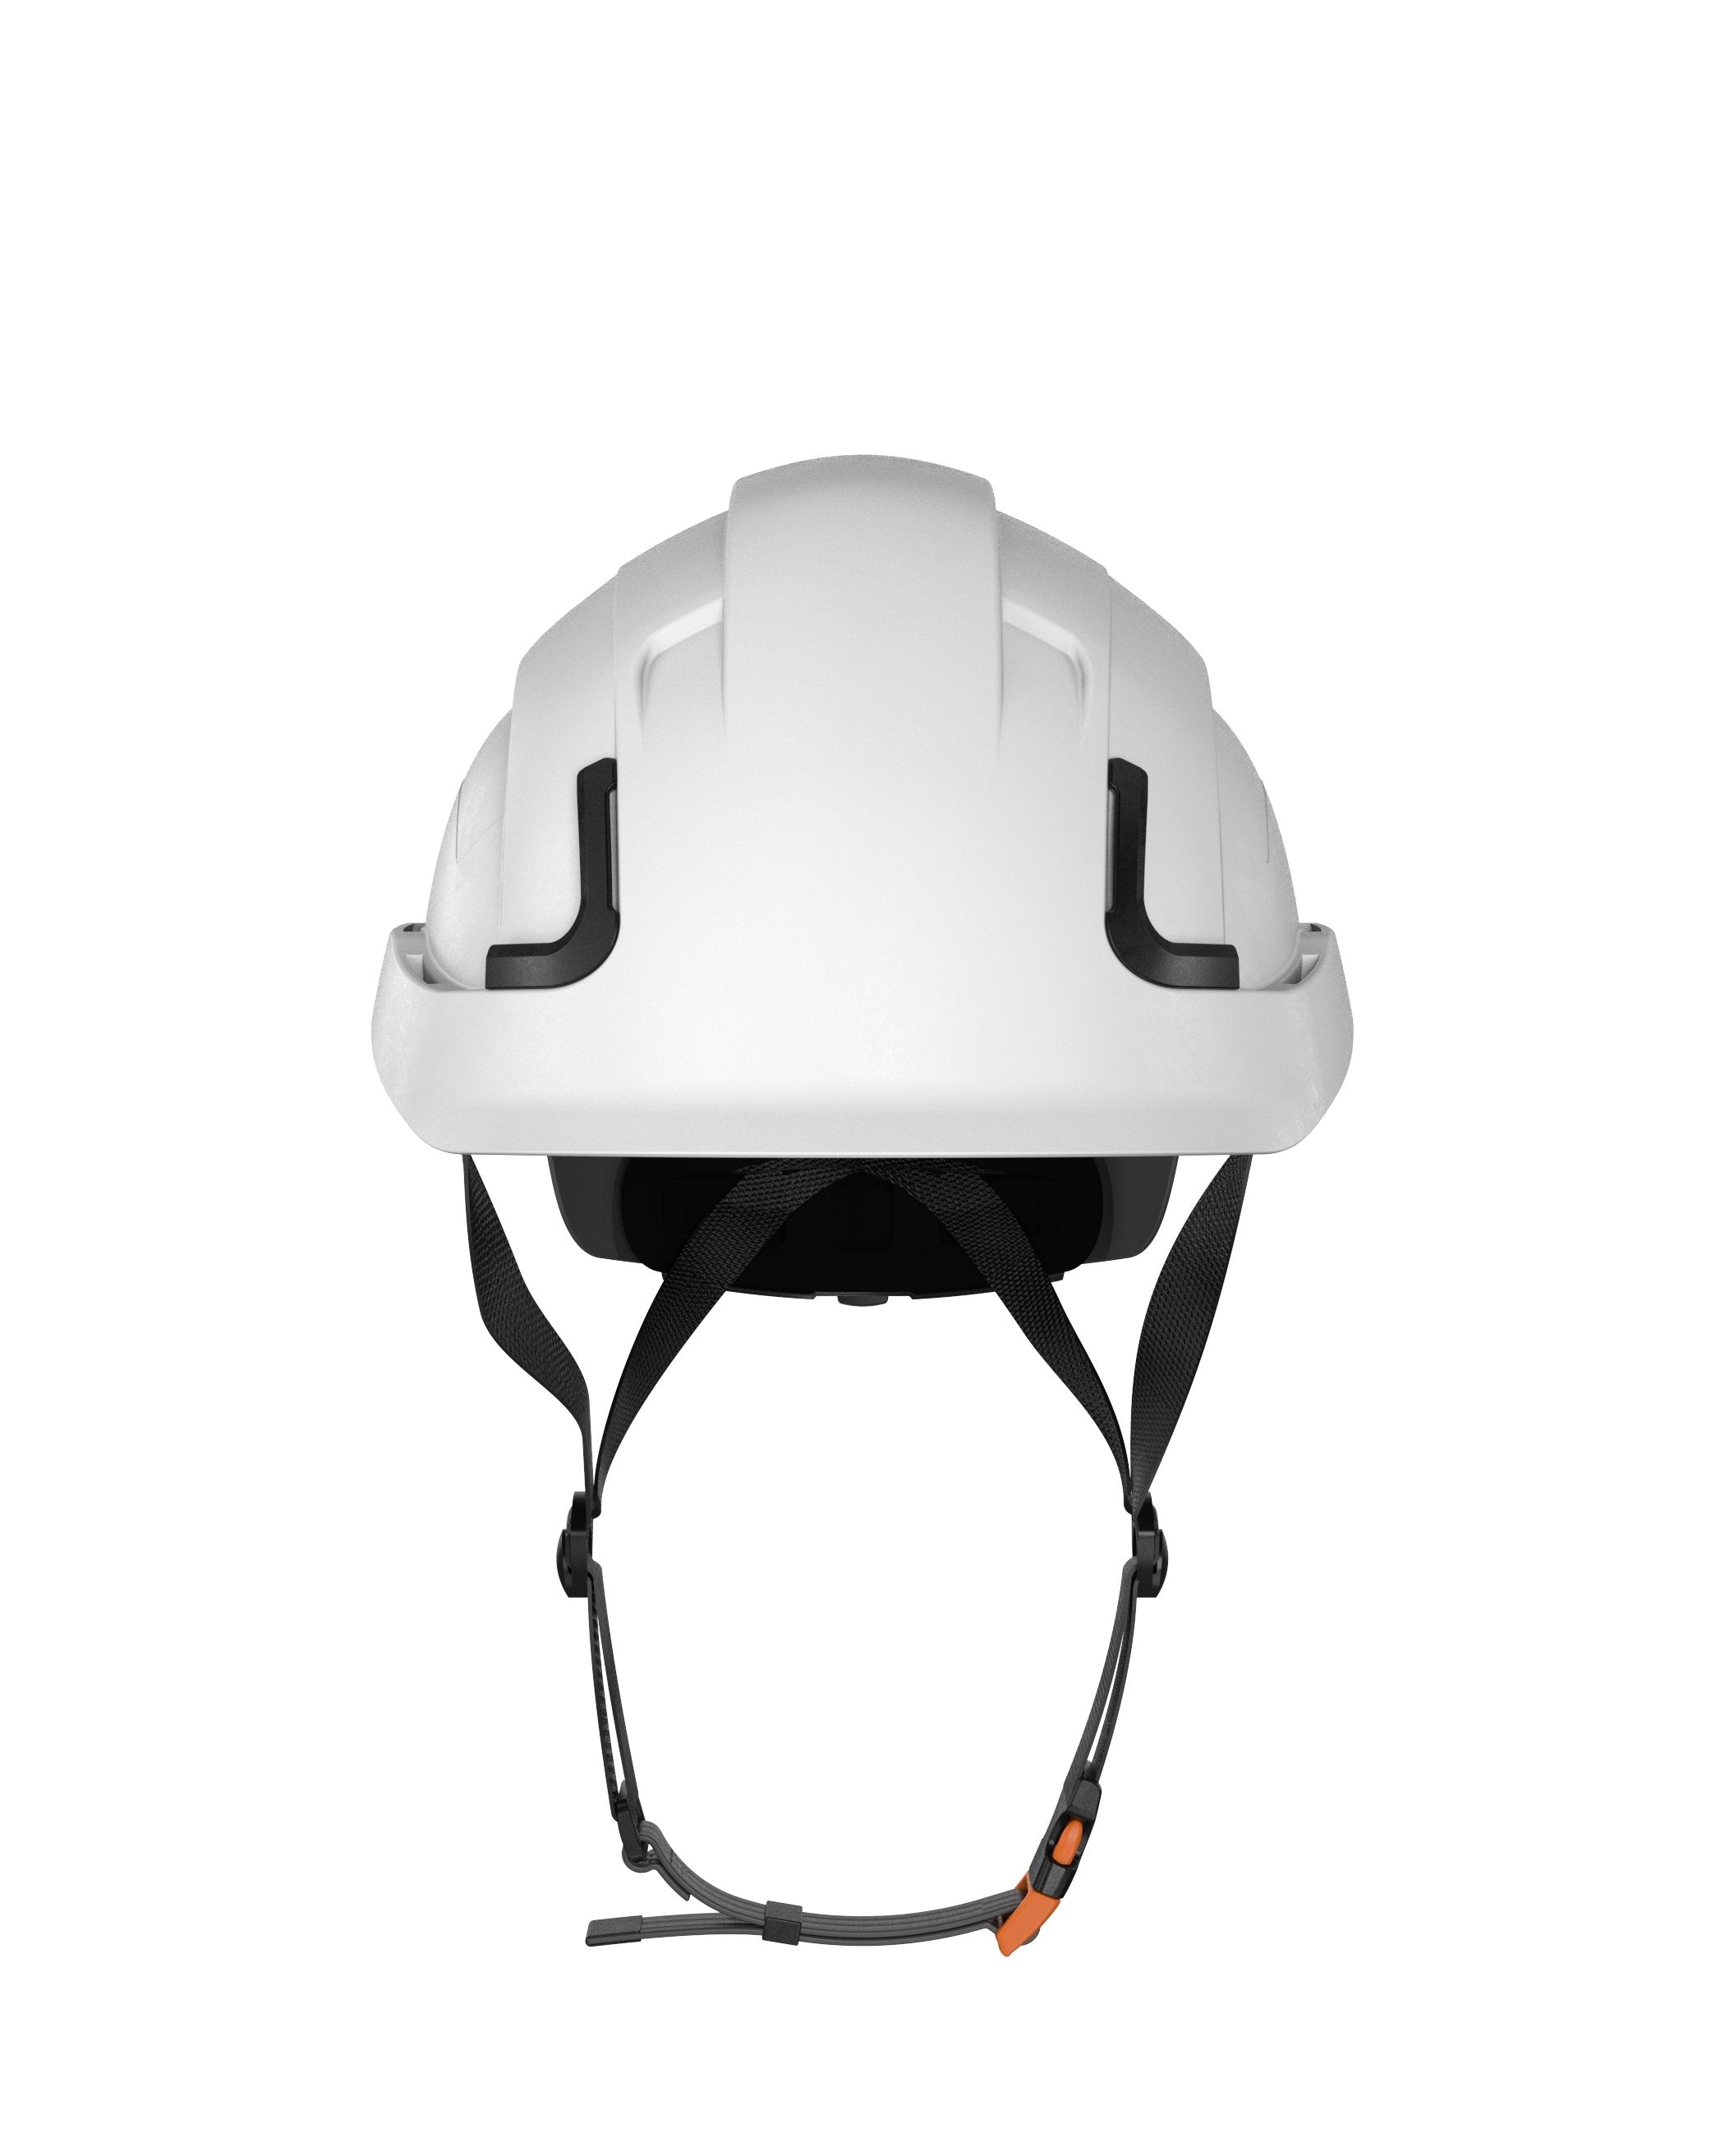 H2-EHV Safety Helmet w/ CLEAR Visor Type 2 Class E, ANSI Z89 and EN12492 rated - Defender Safety